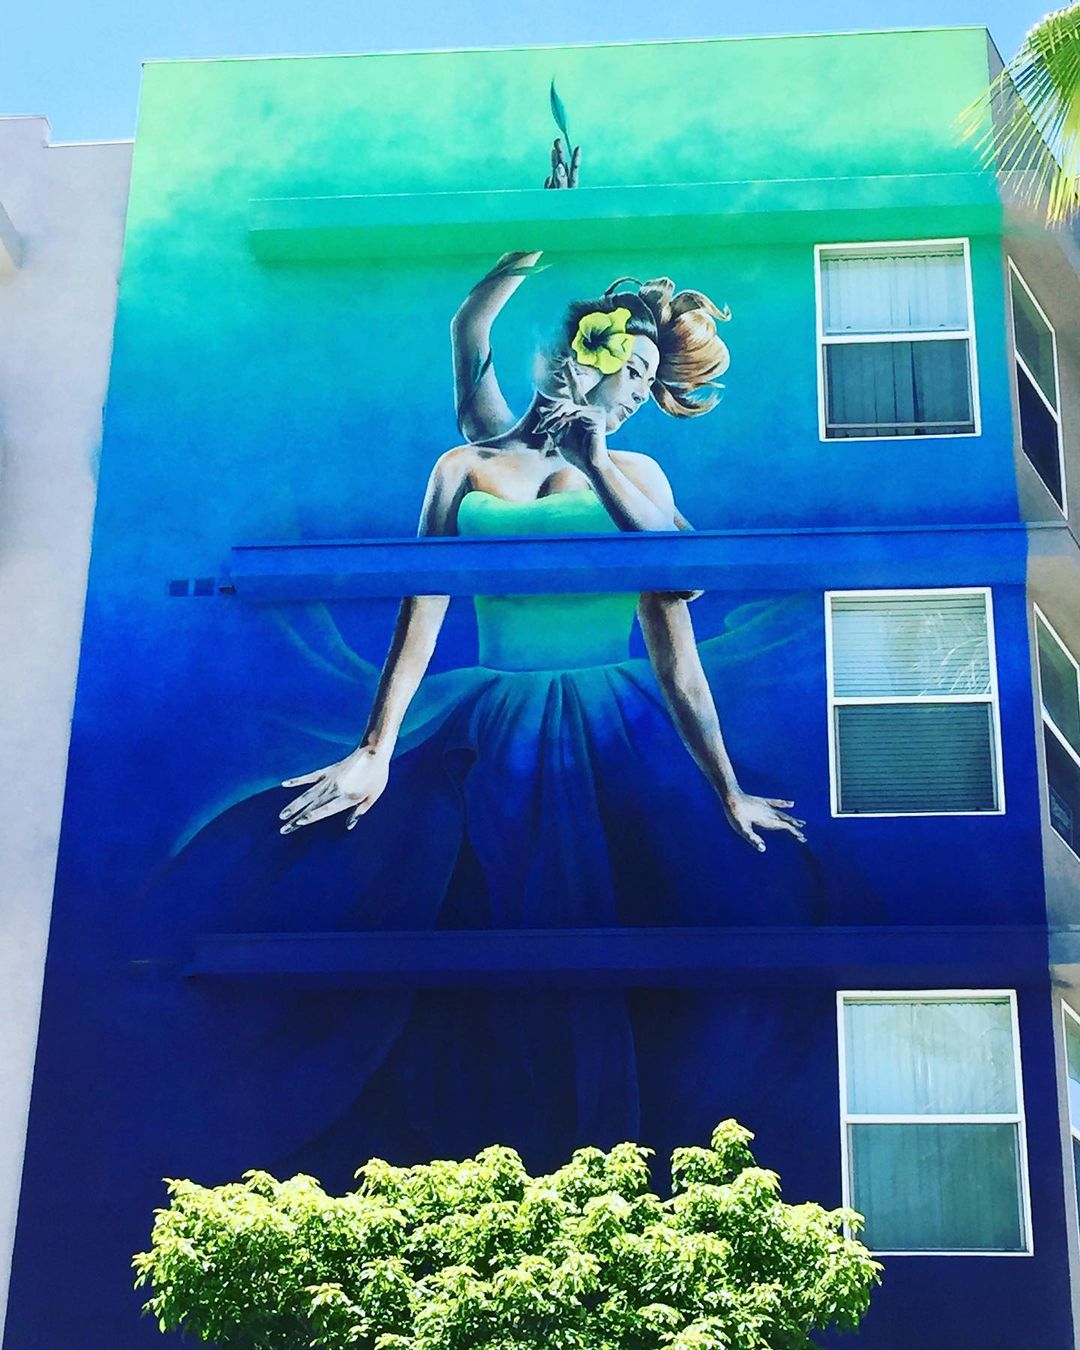 One of the many murals dispersed throughout the Long Beach metro, featuring a young woman with four arms, a flower, a vine, and a flowy dress. Photo by Instagram user @thepursuitofhappenstance.